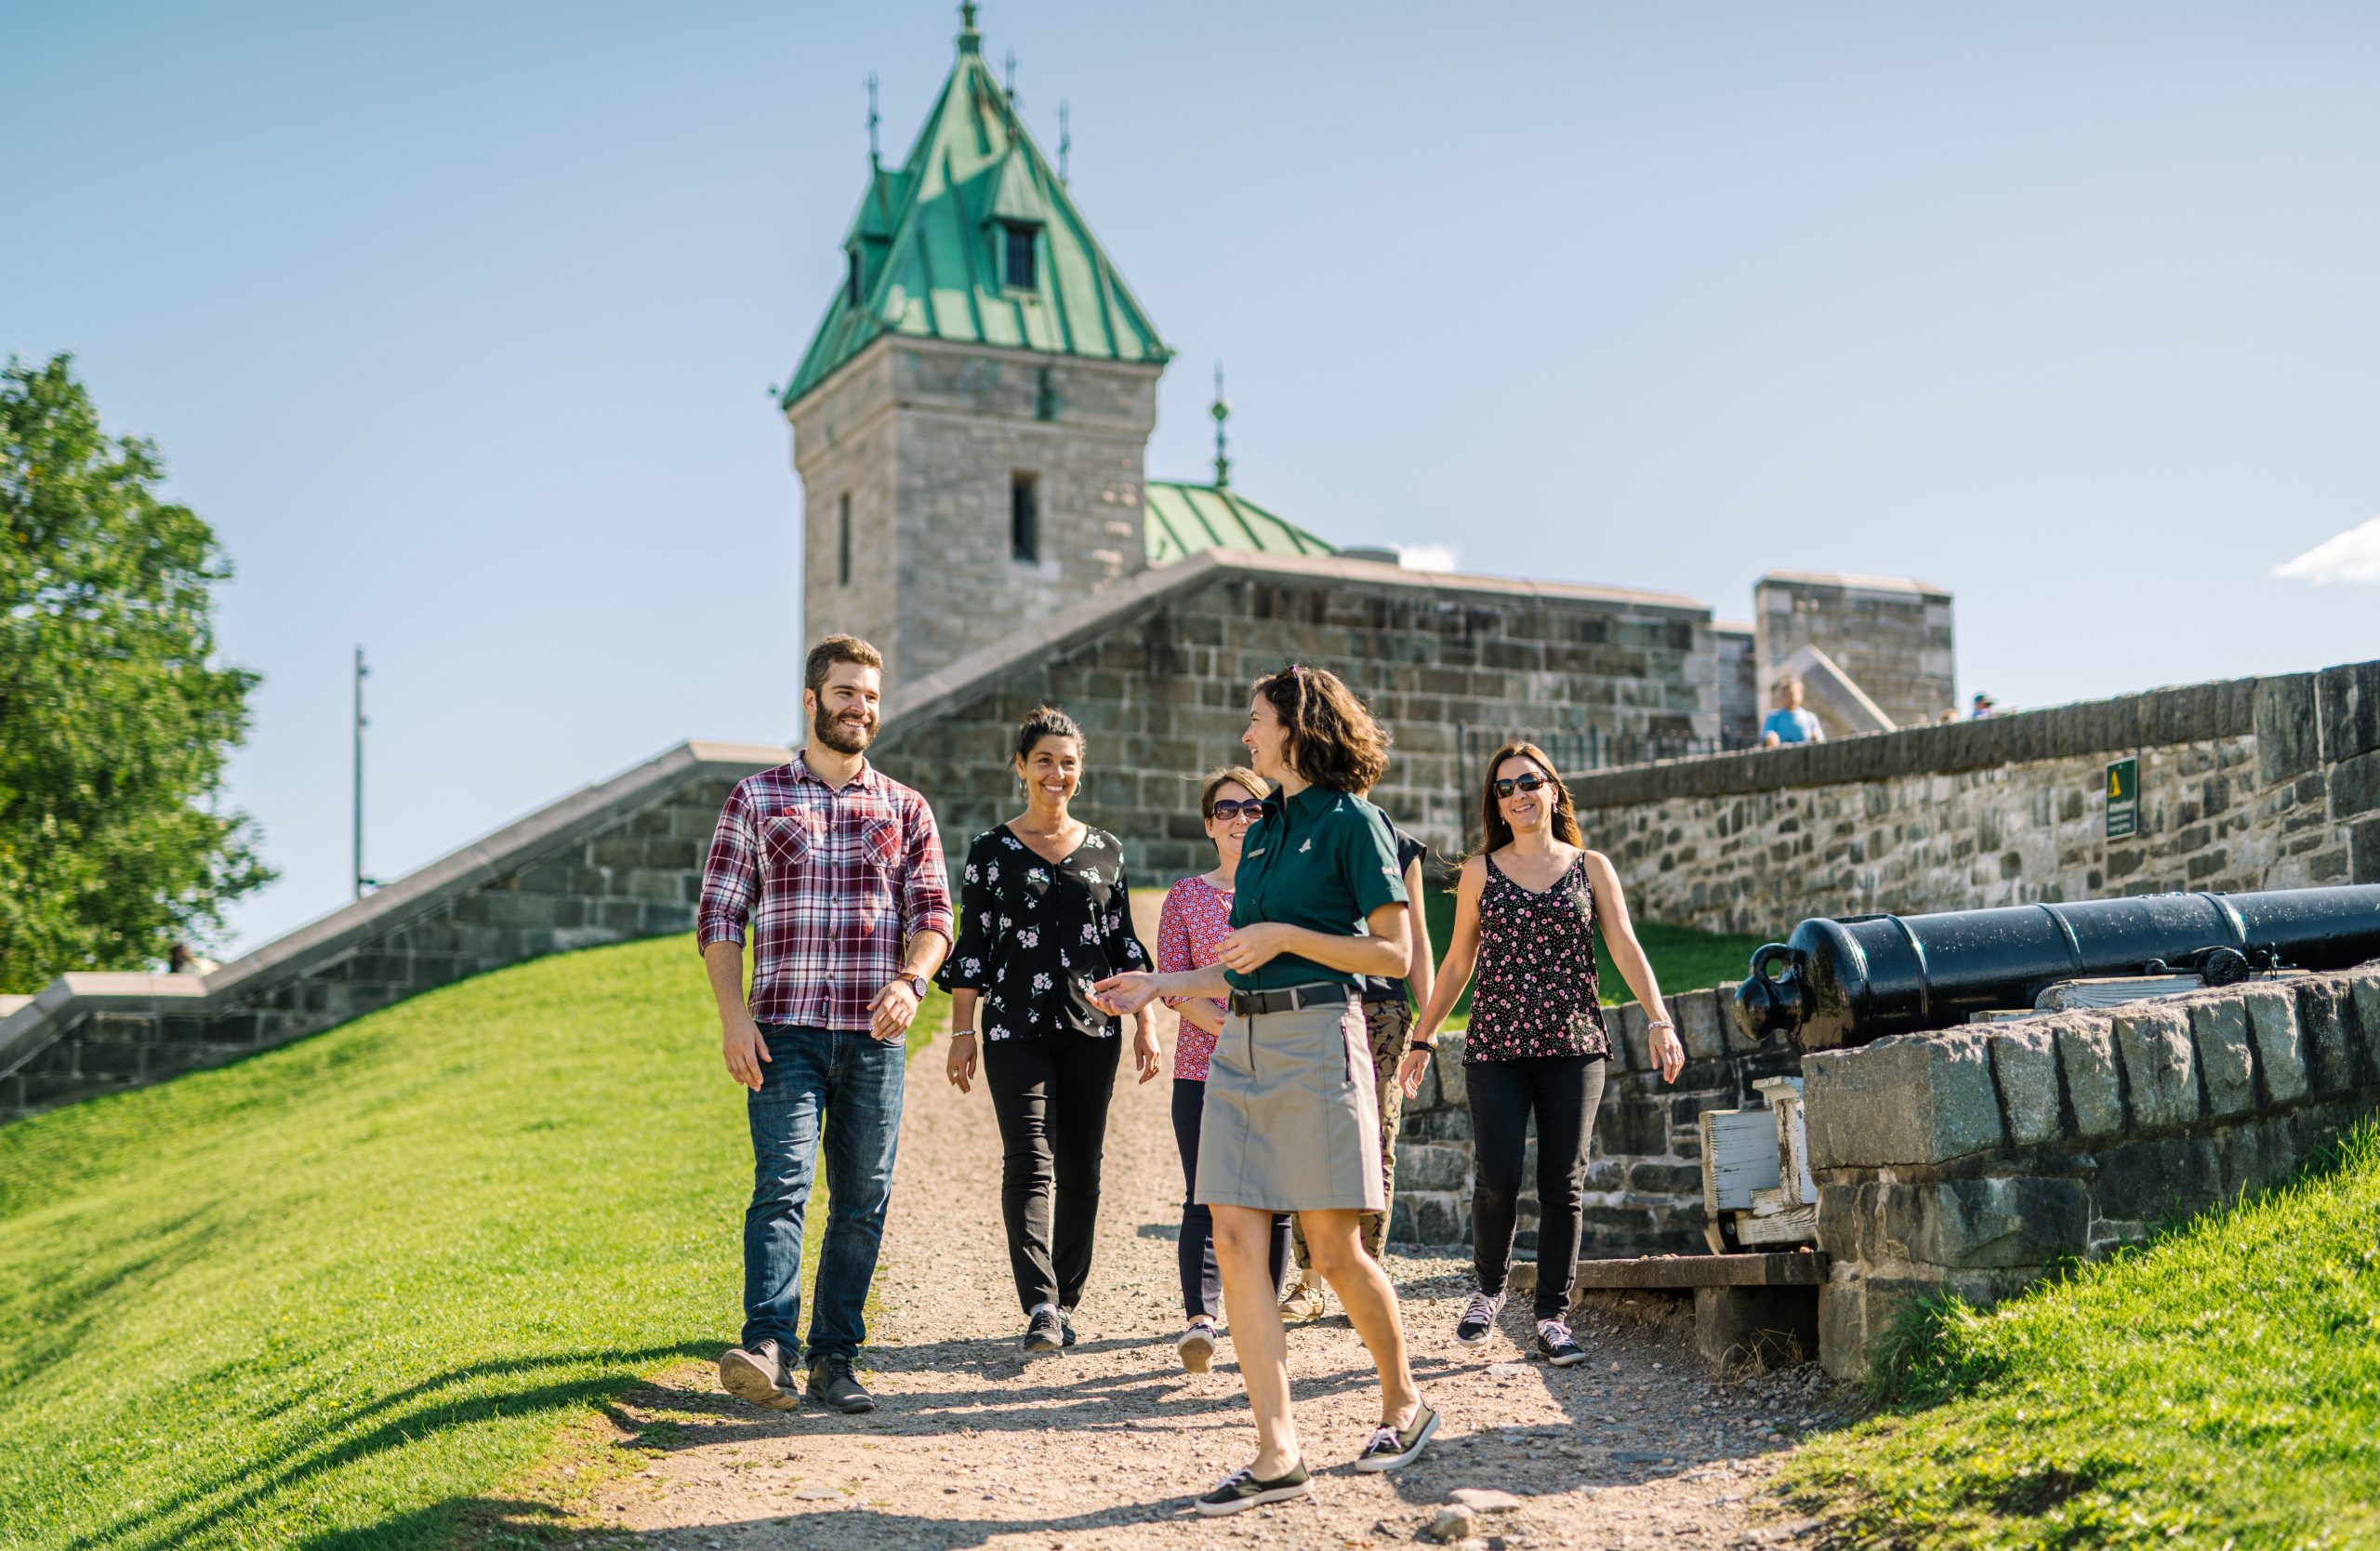 5 reasons to spend your summer vacation in Québec City